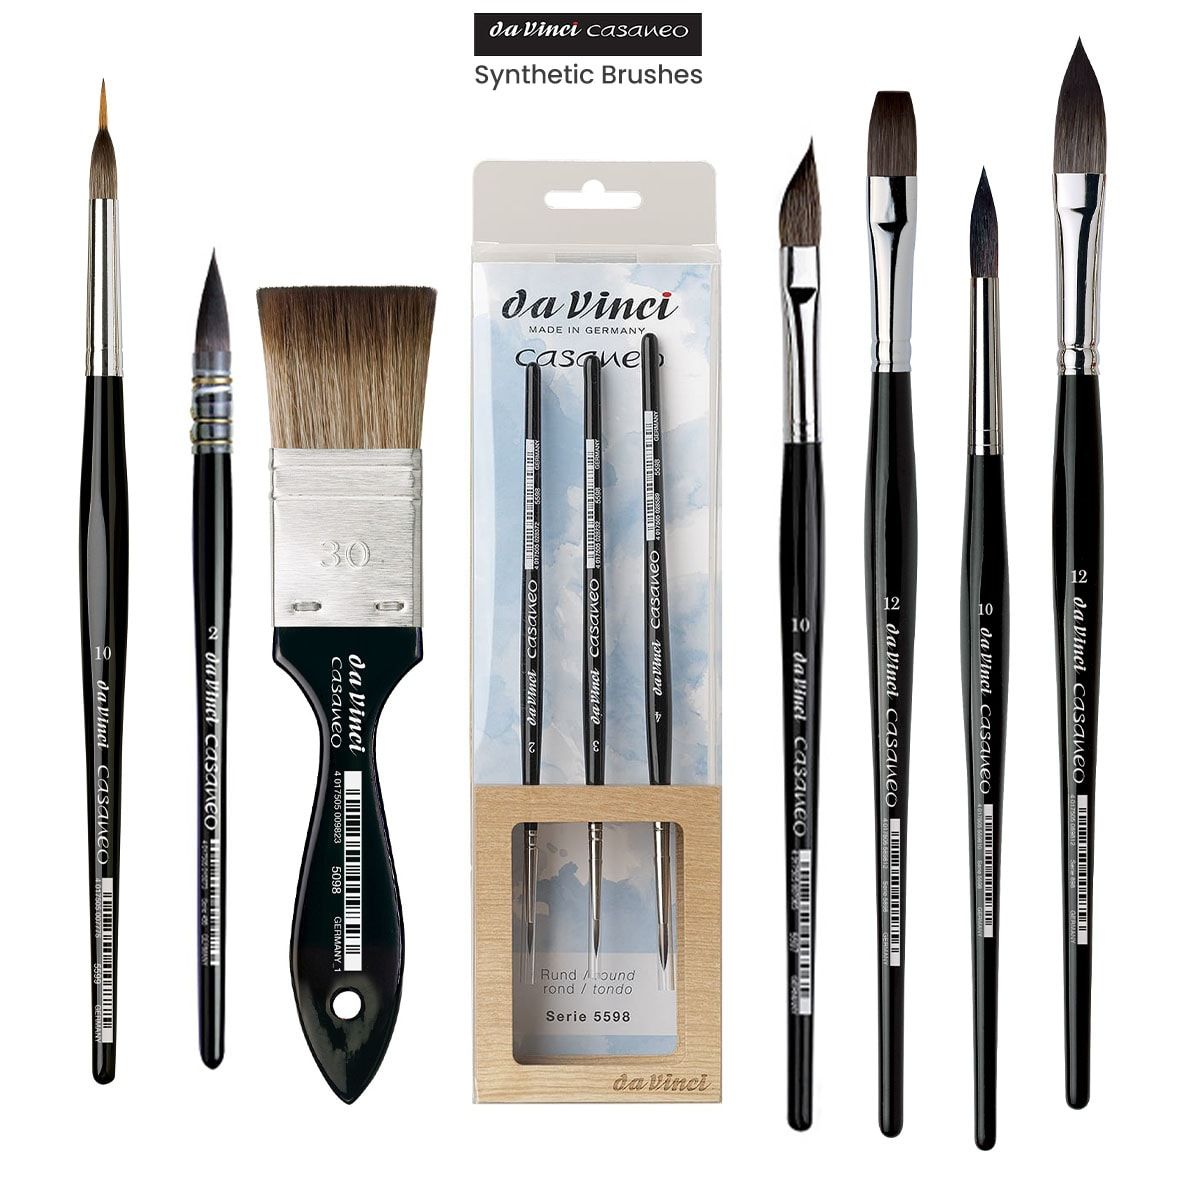 New da Vinci Colineo brushes! Unboxing + playing with brush